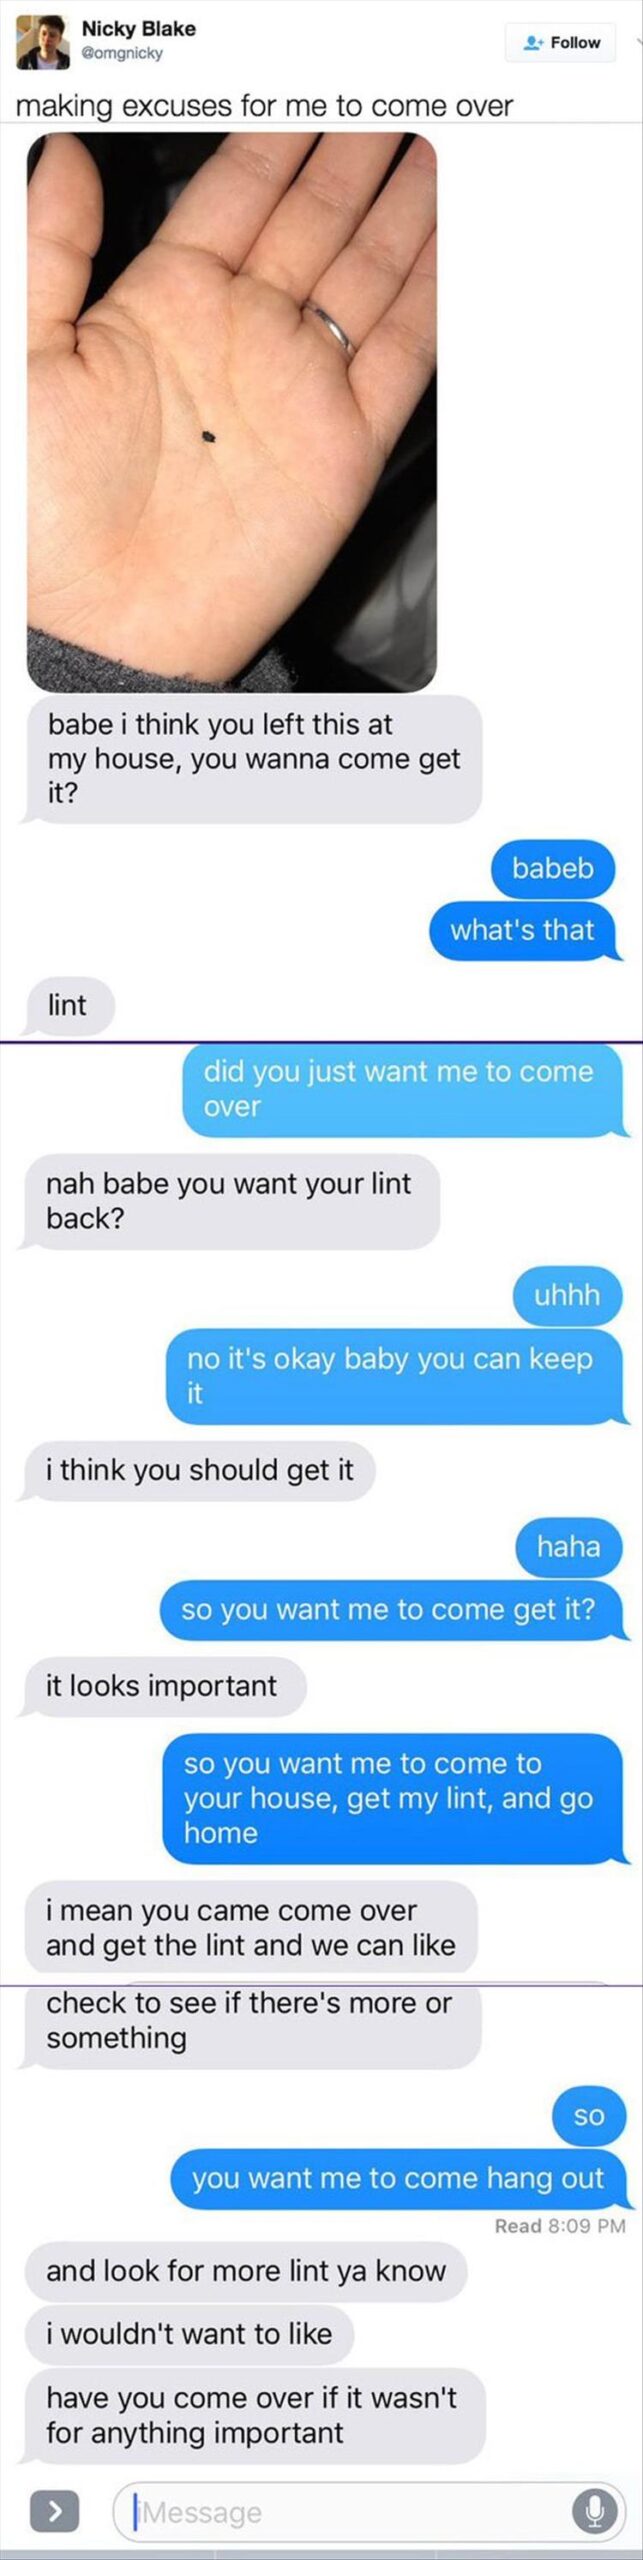 Romantic And Cute Couple Texts To Make You Smile; Funny Texts; Relationship Texts; Texts; Relationship Goal; Couple Texts; Funny Couple Texts; Funny Messages; Romantic Messages; Romantic Texts #funnytexts #relationshiptexts #texts #relationshipgoal #funnymessages #coupletexts #funnycoupletexts #romantictexts #sweettexts